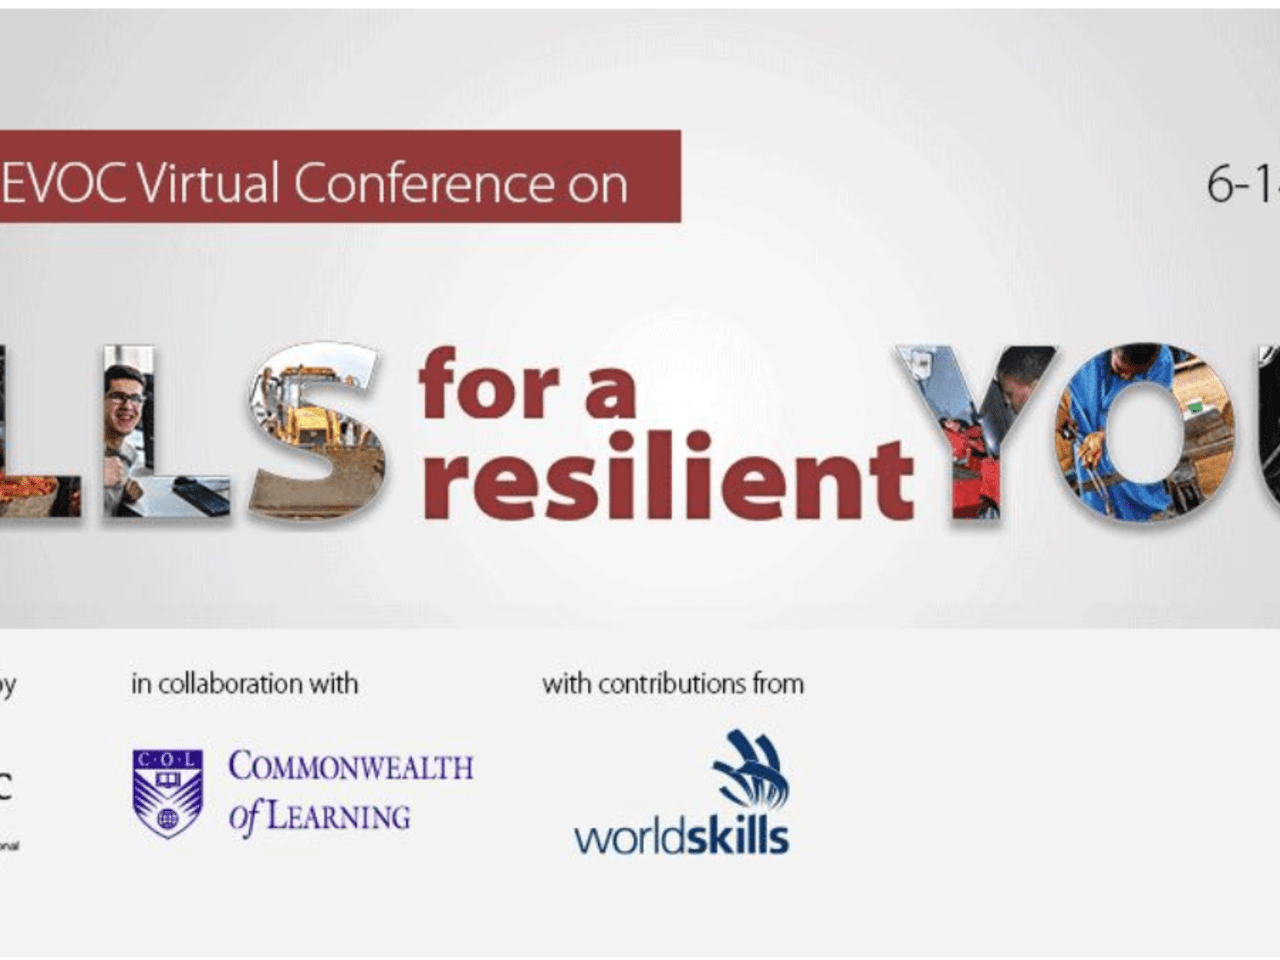 Champions Trust participates in Skills for a Resilient Youth UNESCO-UNEVOC Conference